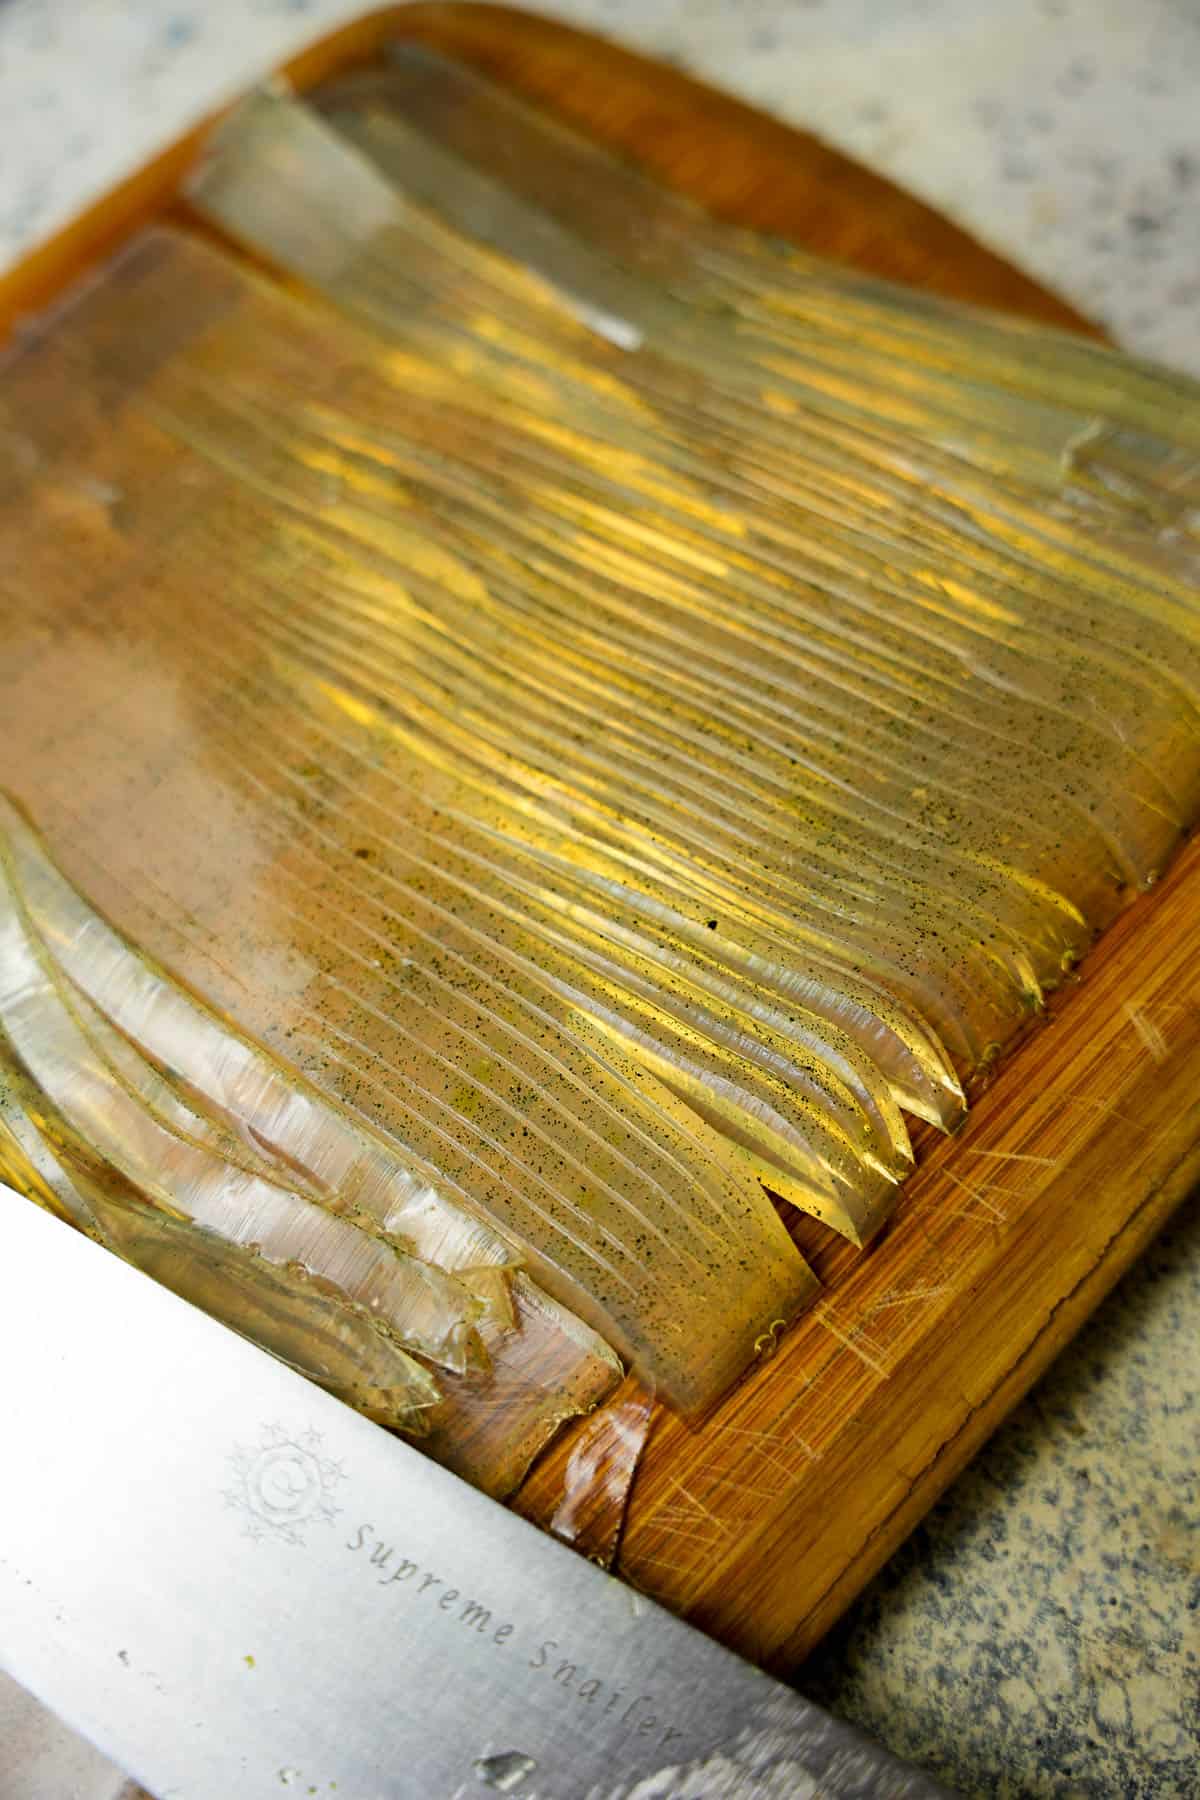 the pandan jelly is thinly sliced into semi-transparant noodles with a sharp knife on a cutting board.